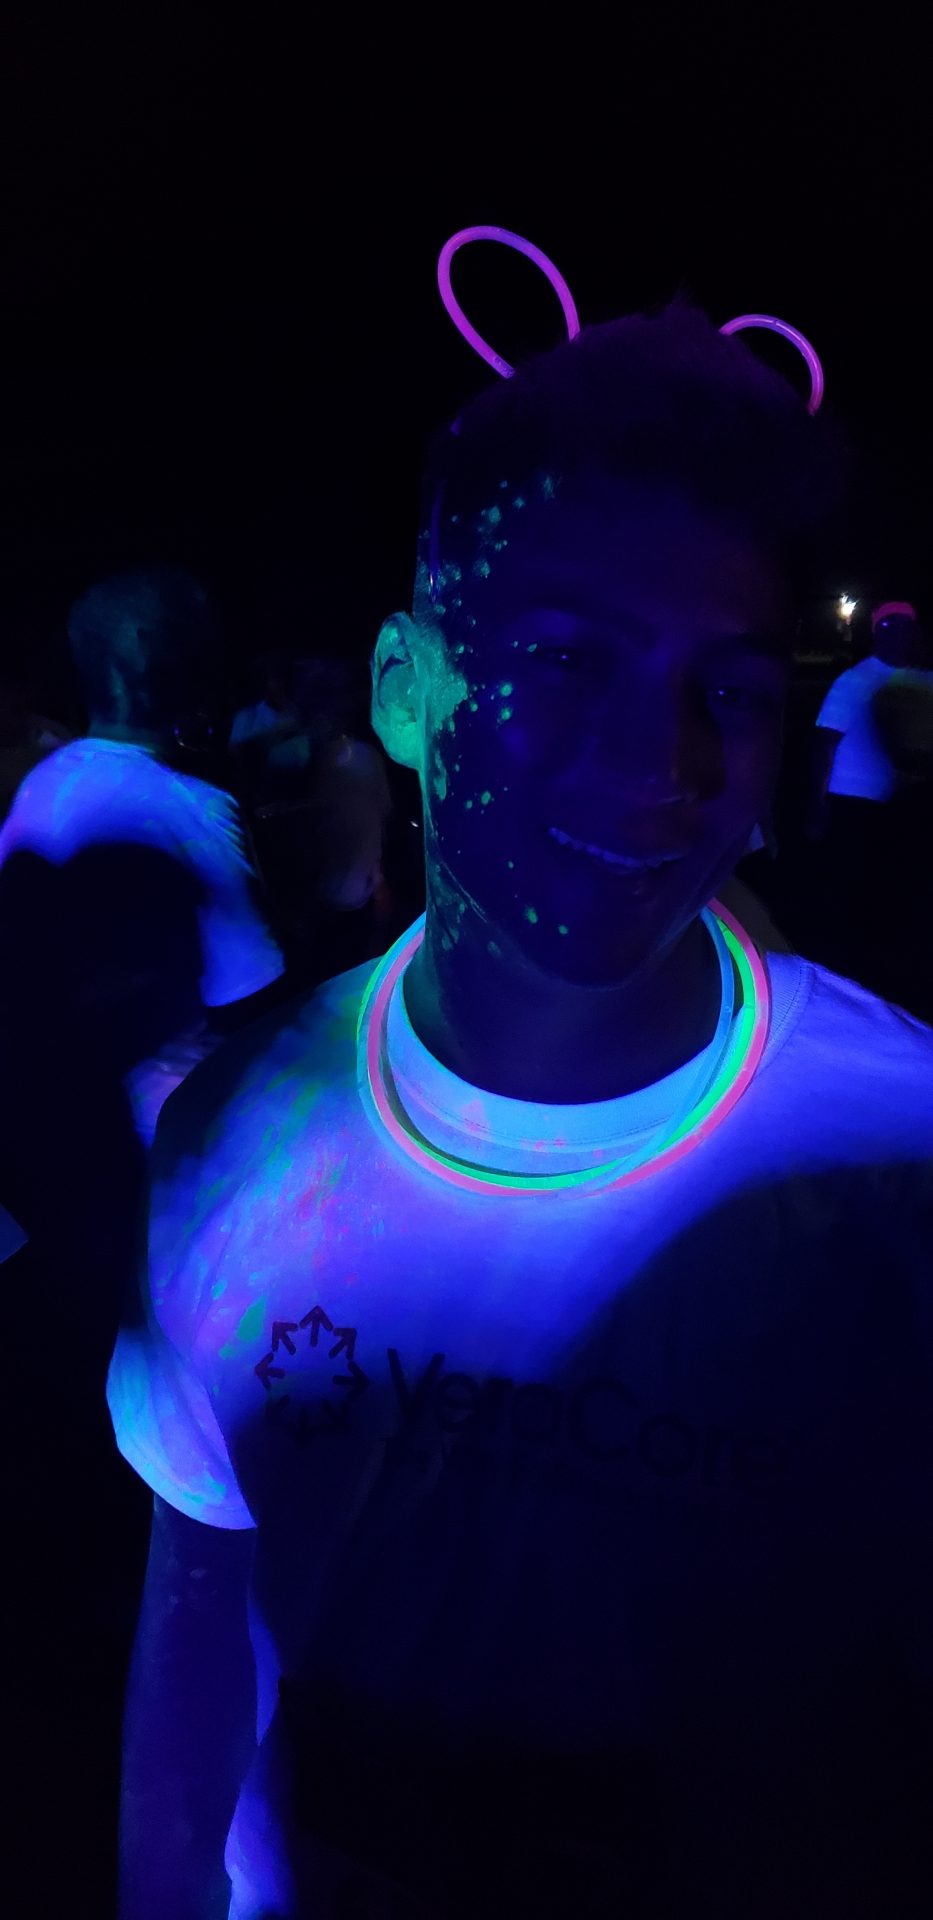 Simon Cano covered in UV glow powde